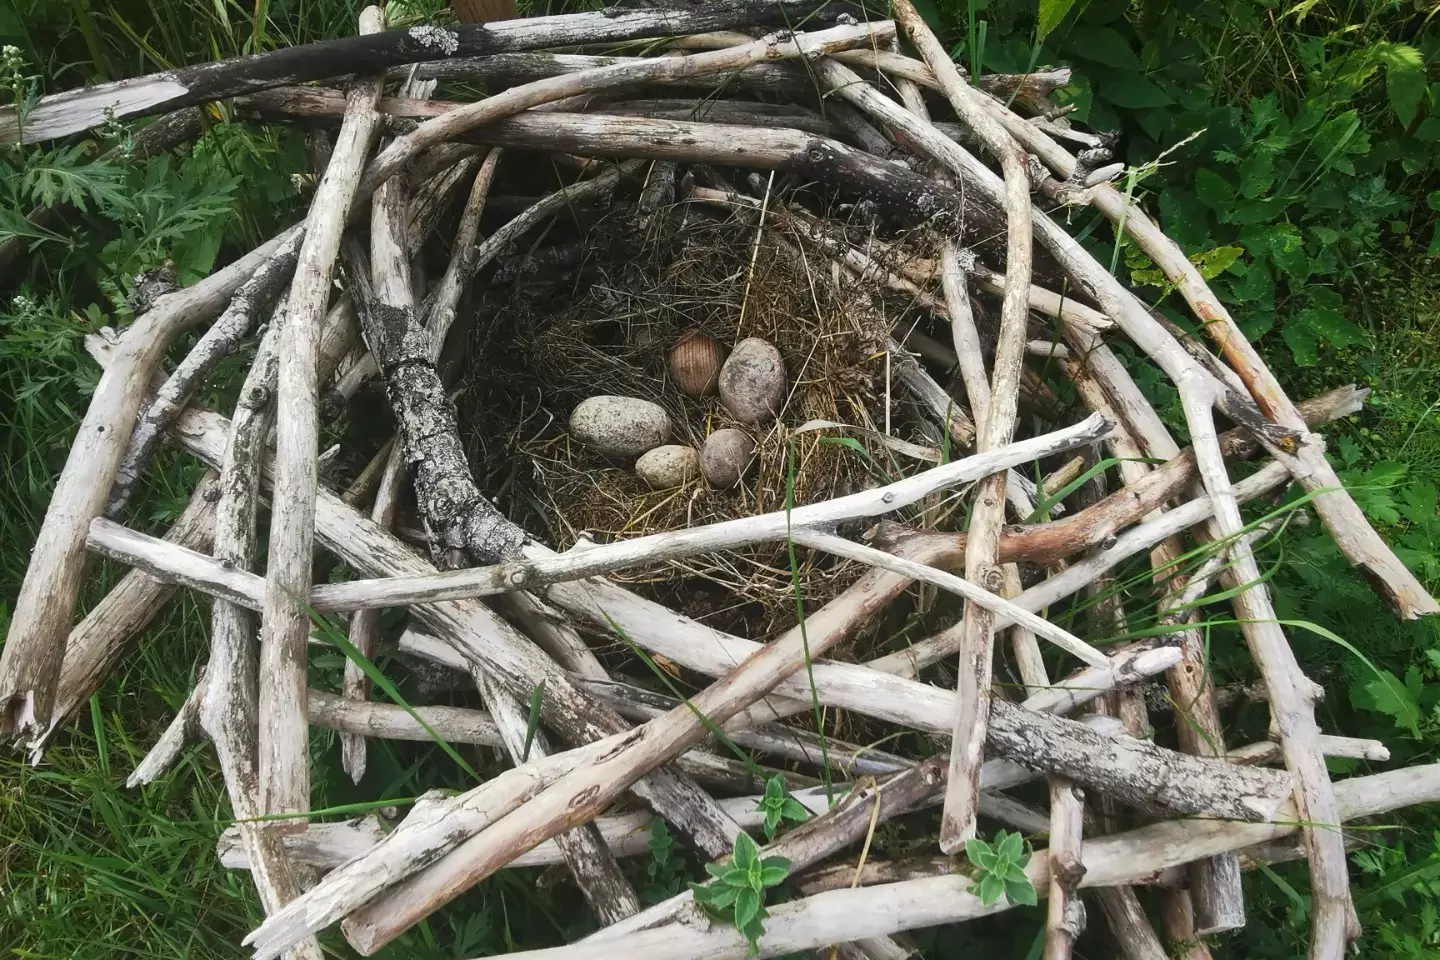 A bird's nest made of tree branches, with round stones as eggs.